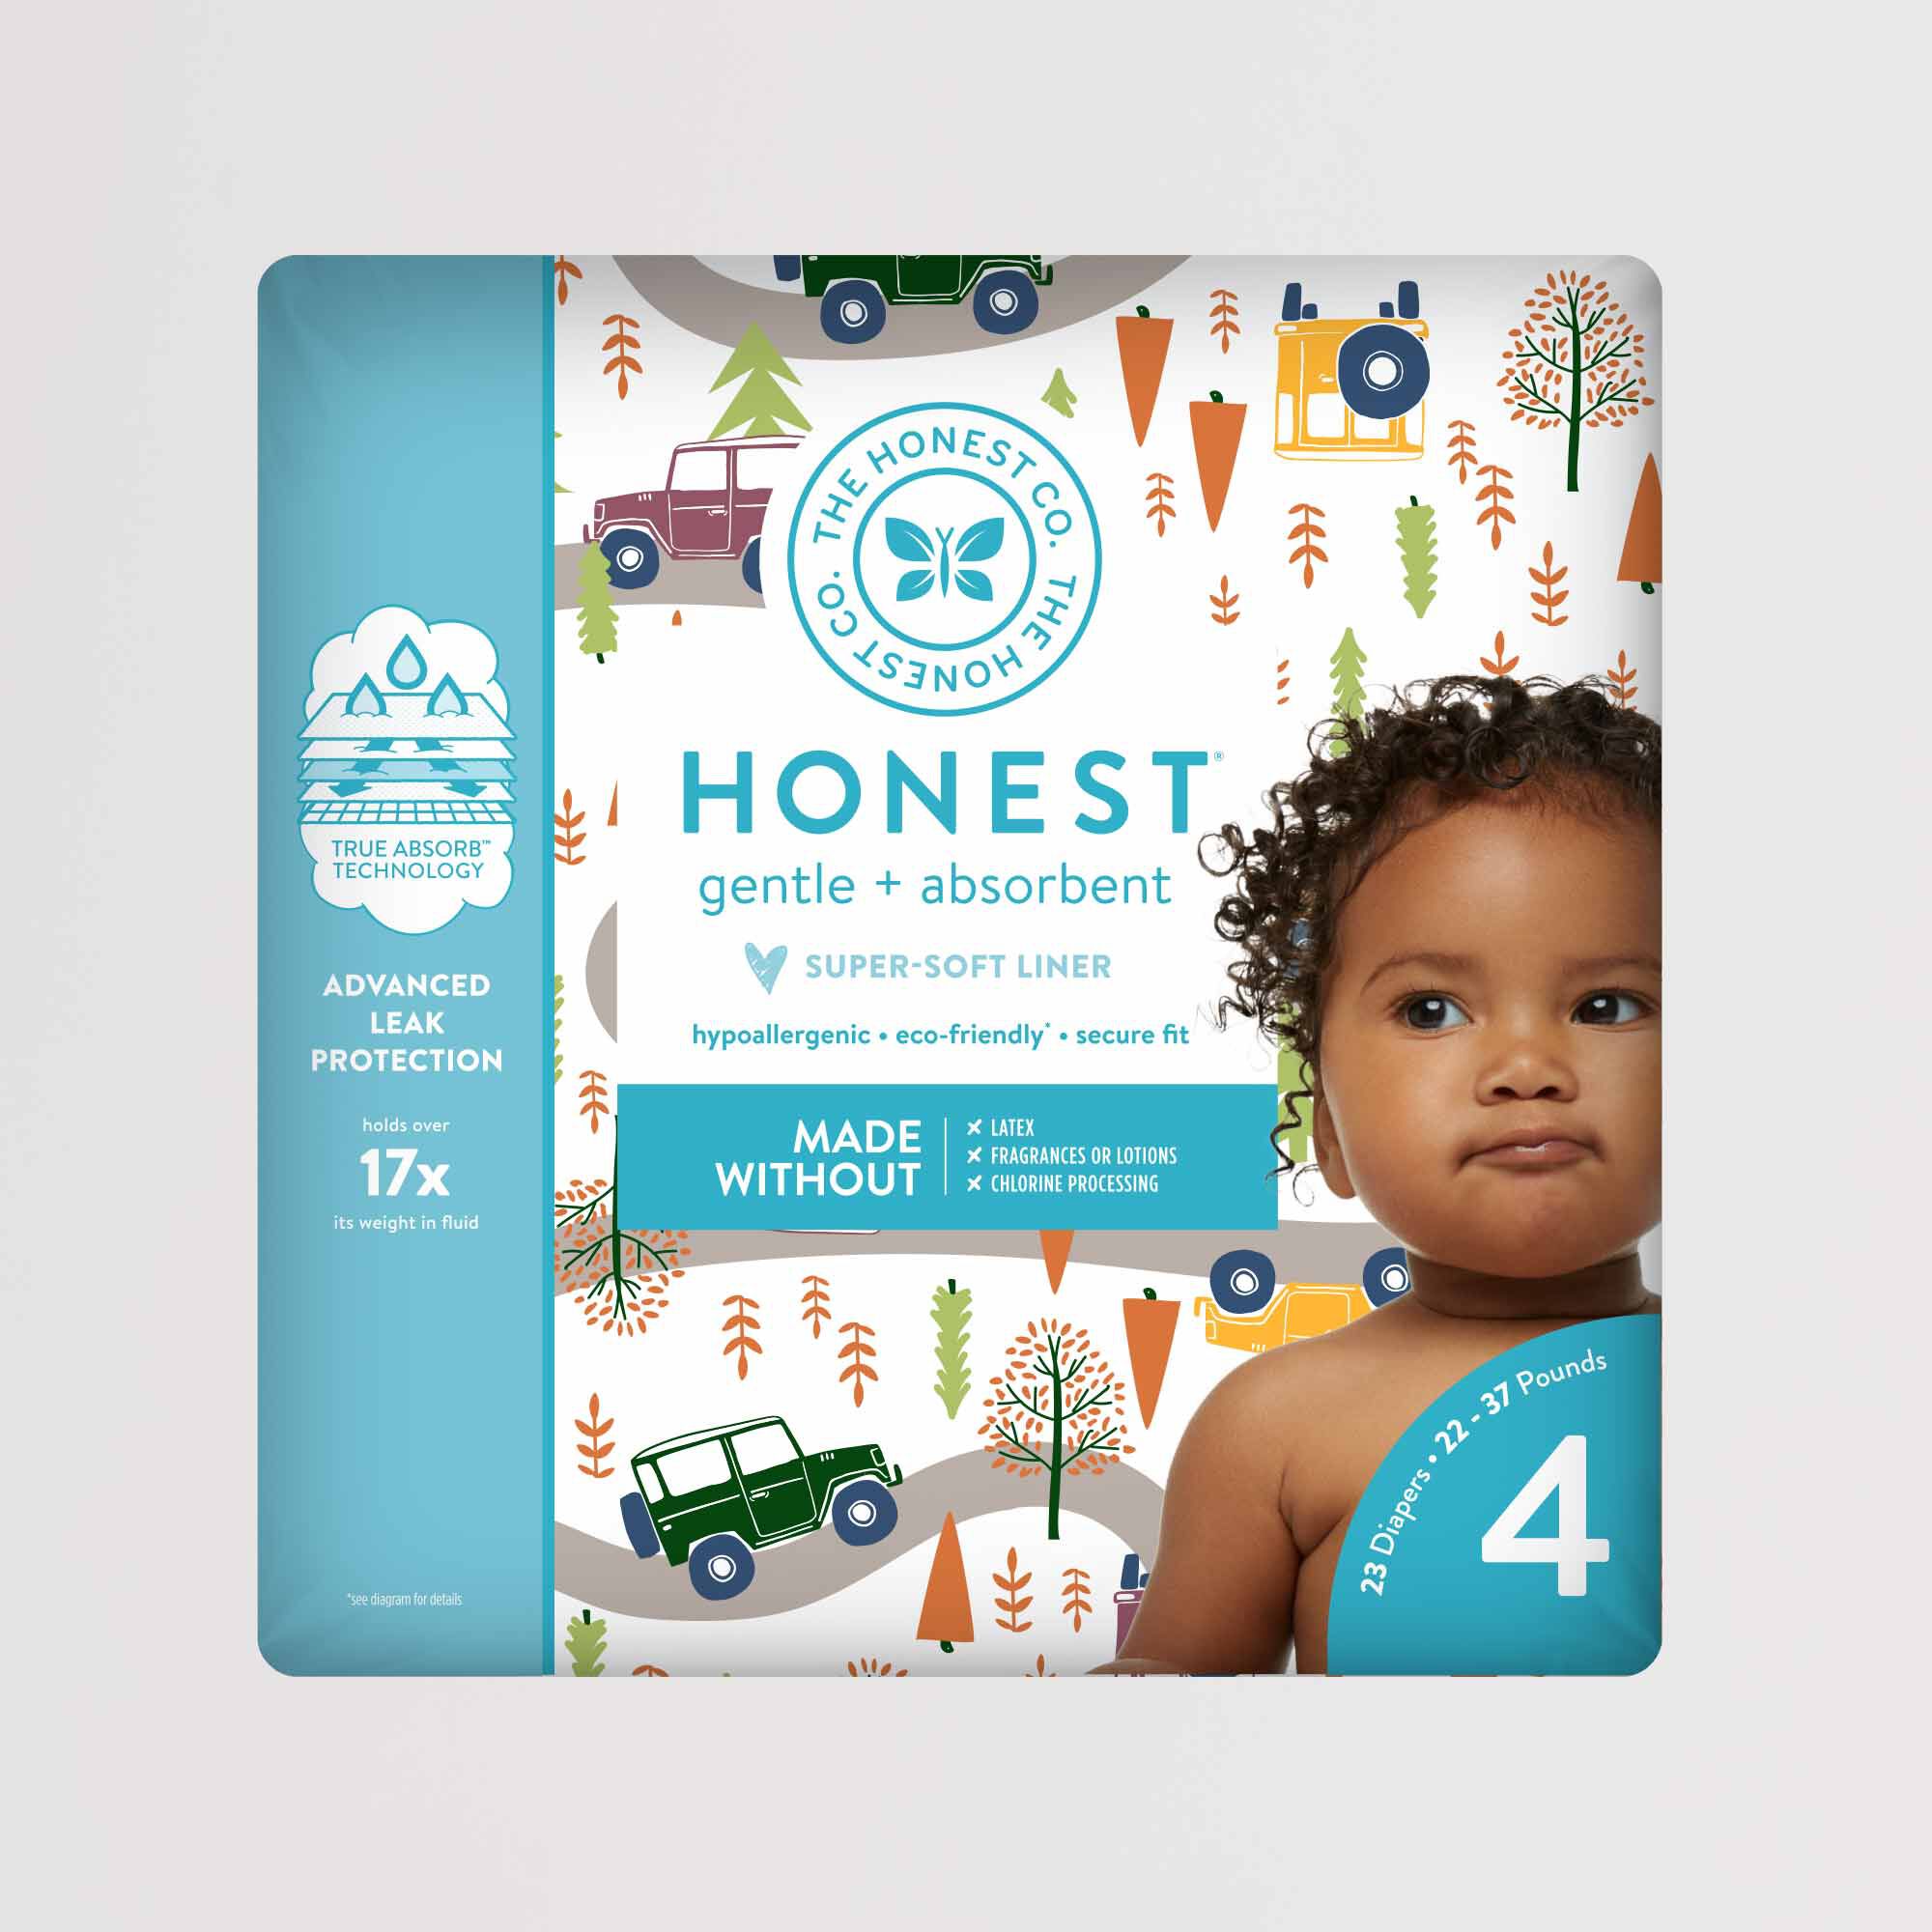 about honest diapers